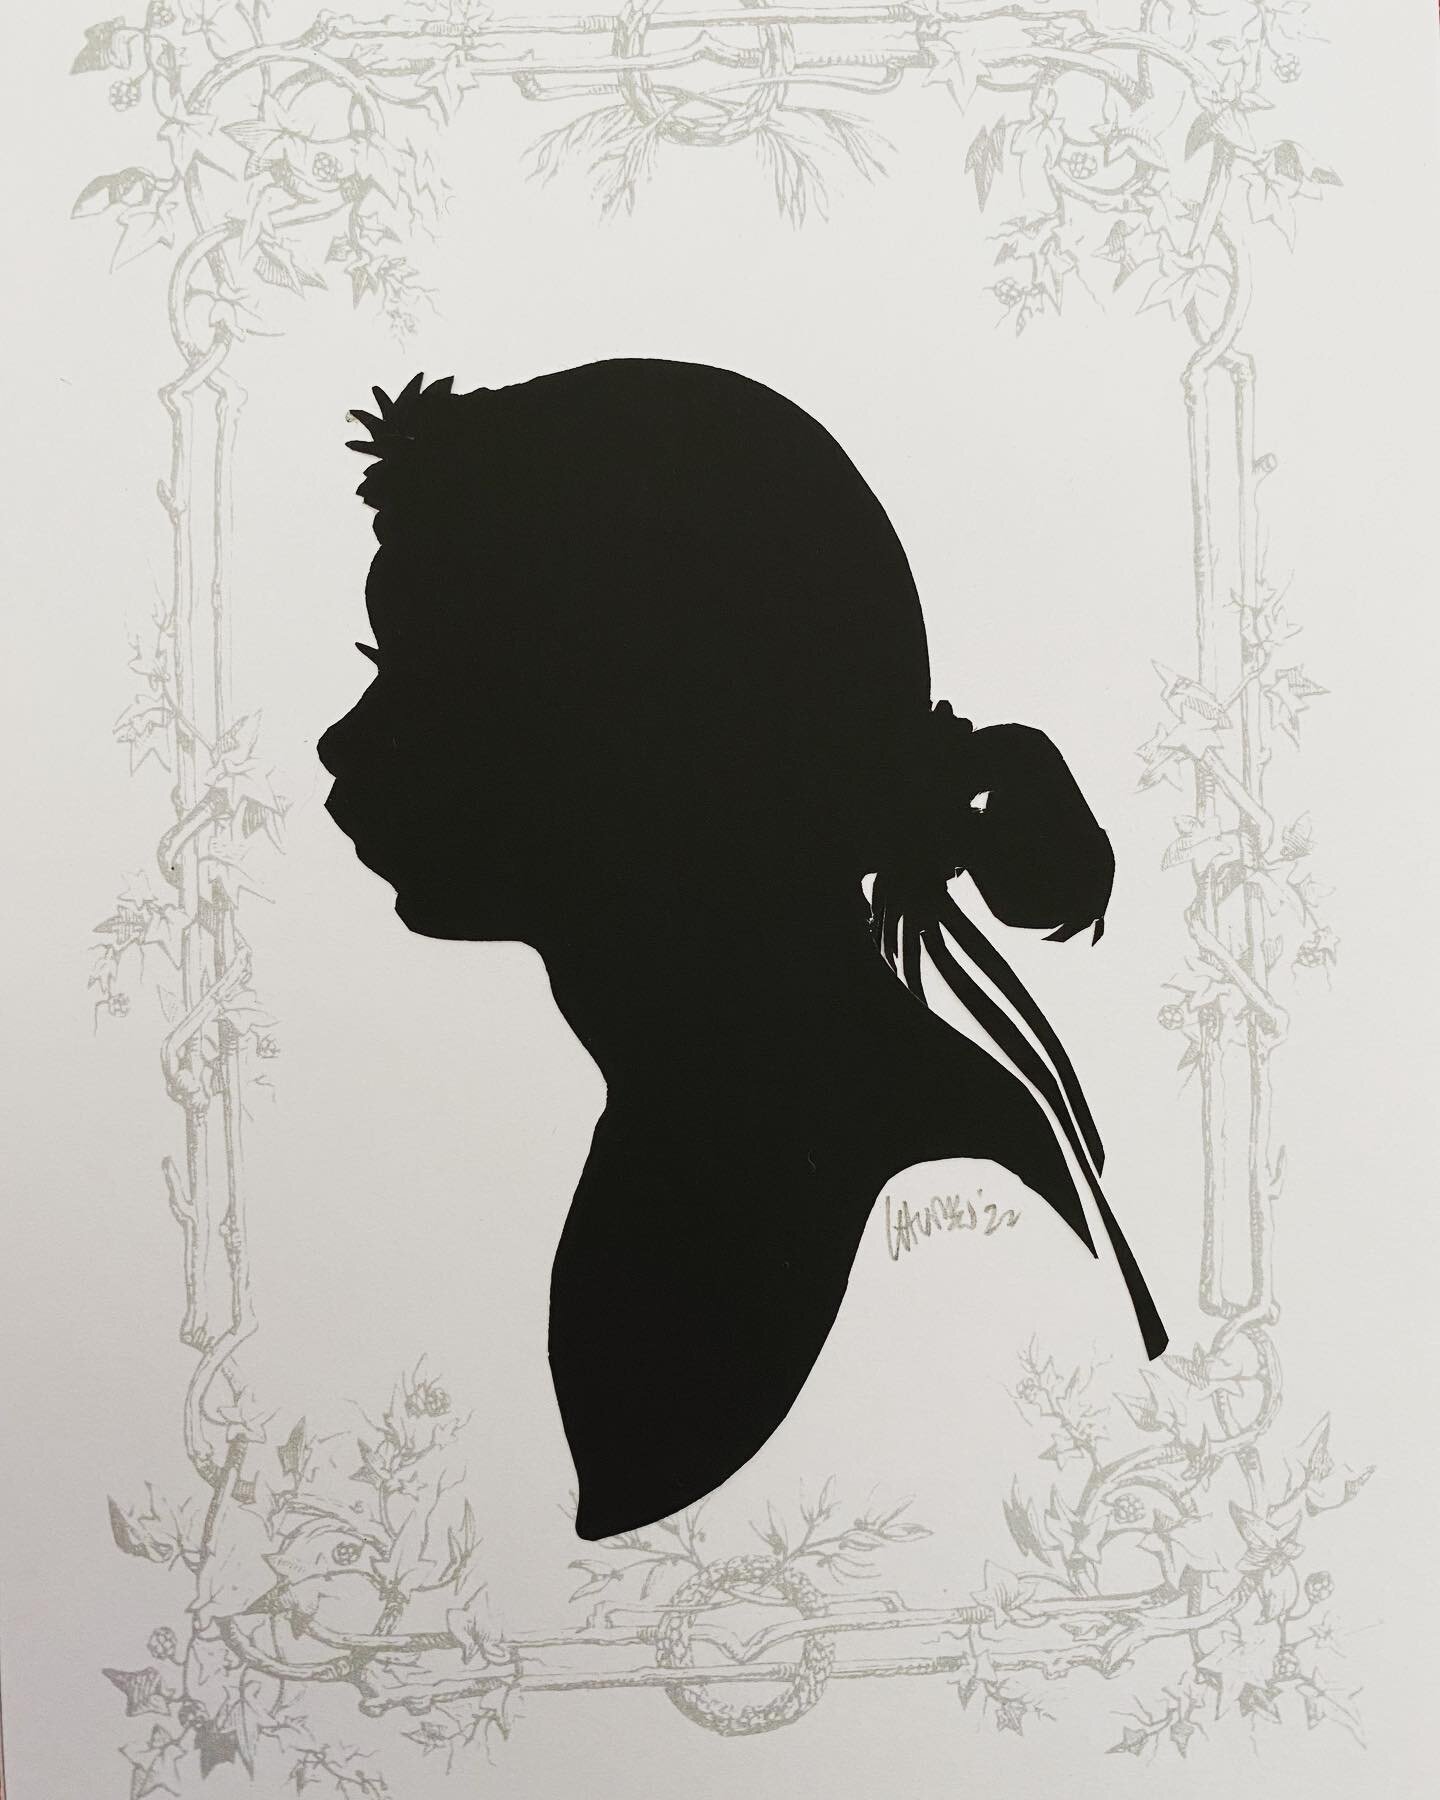 I cut this silhouette last weekend at @mdrenfest /@mdrennfest . This girl's mother called this her &quot;dead-face&quot;. Apparently it's a cool and hip thing now 🤣
.
Enjoy the silhouette... I'll just be over here, laughing when things are funny, in